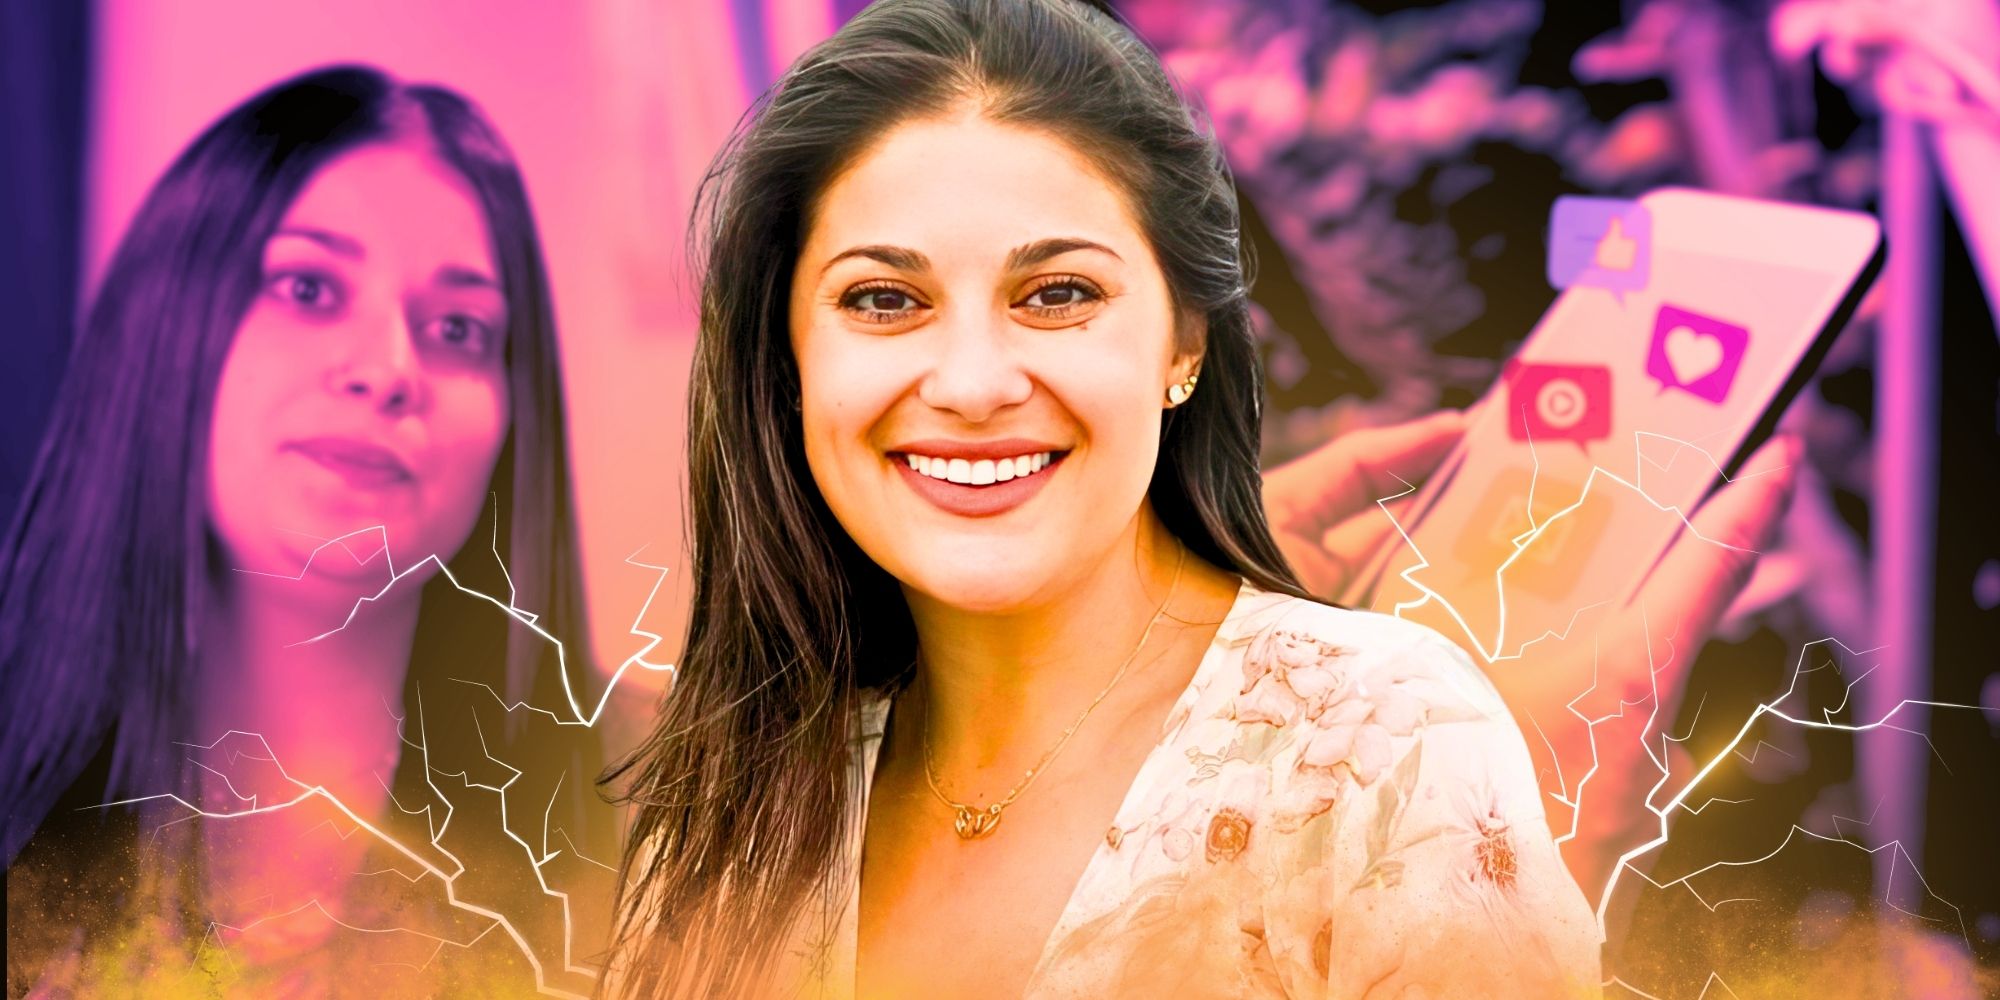 90 Day Fiancé Loren Brovarnik wearing printed dress and smiling with lightning bolt effects and a social media app photo in the background